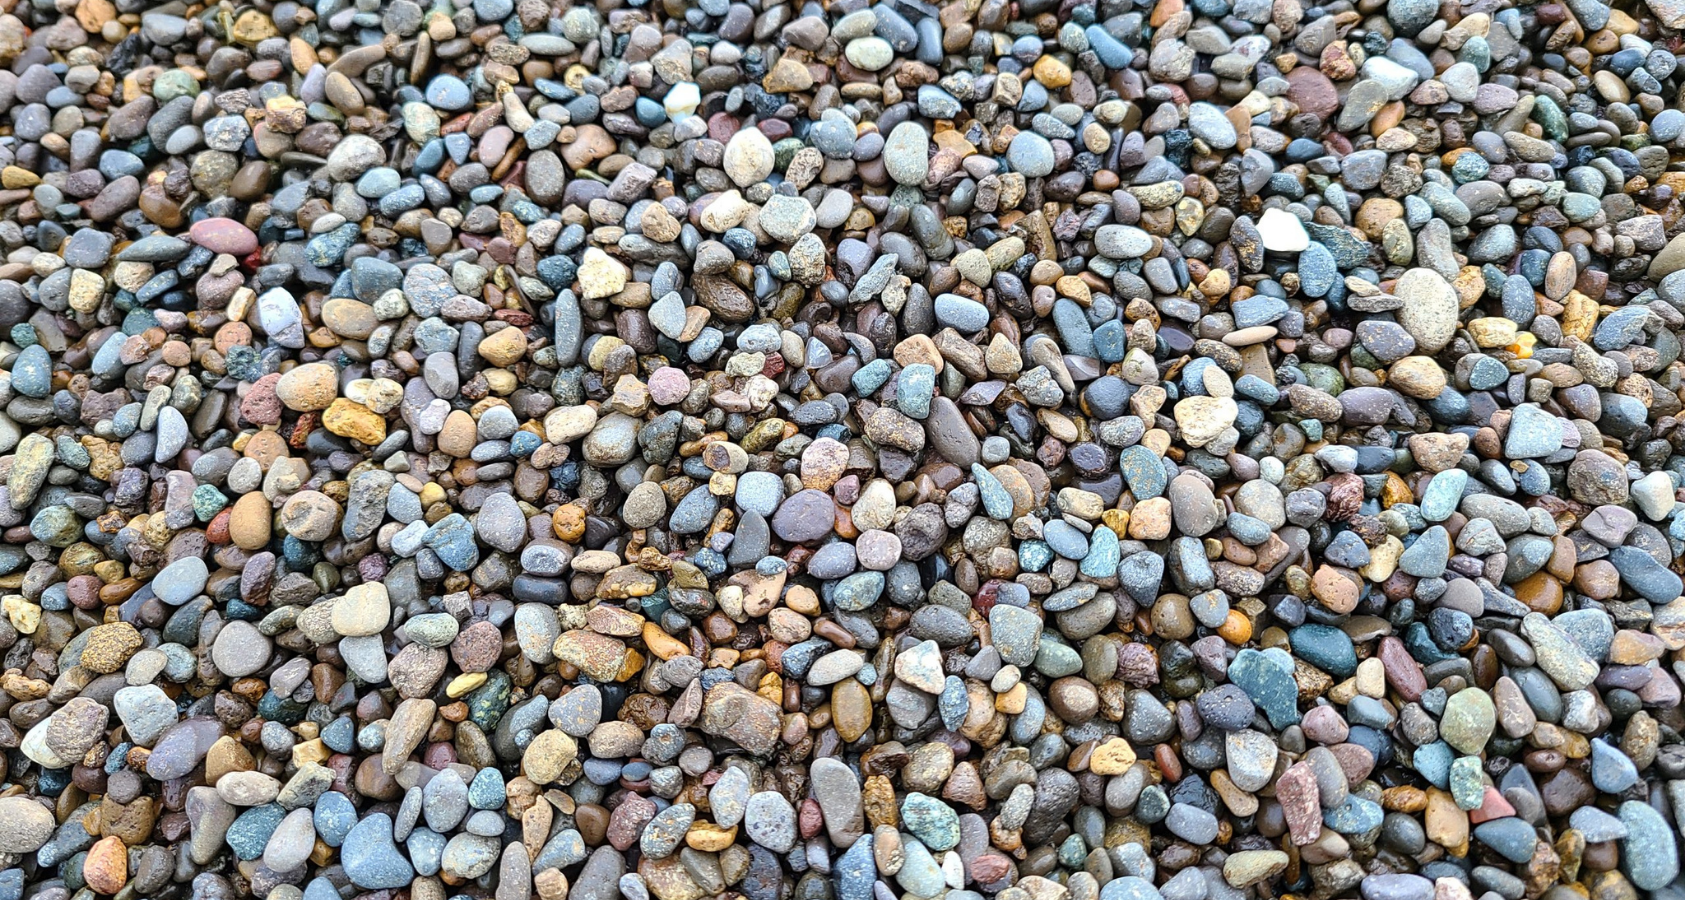 Is Pea Gravel Safe for dogs? | Landscaping Rocks